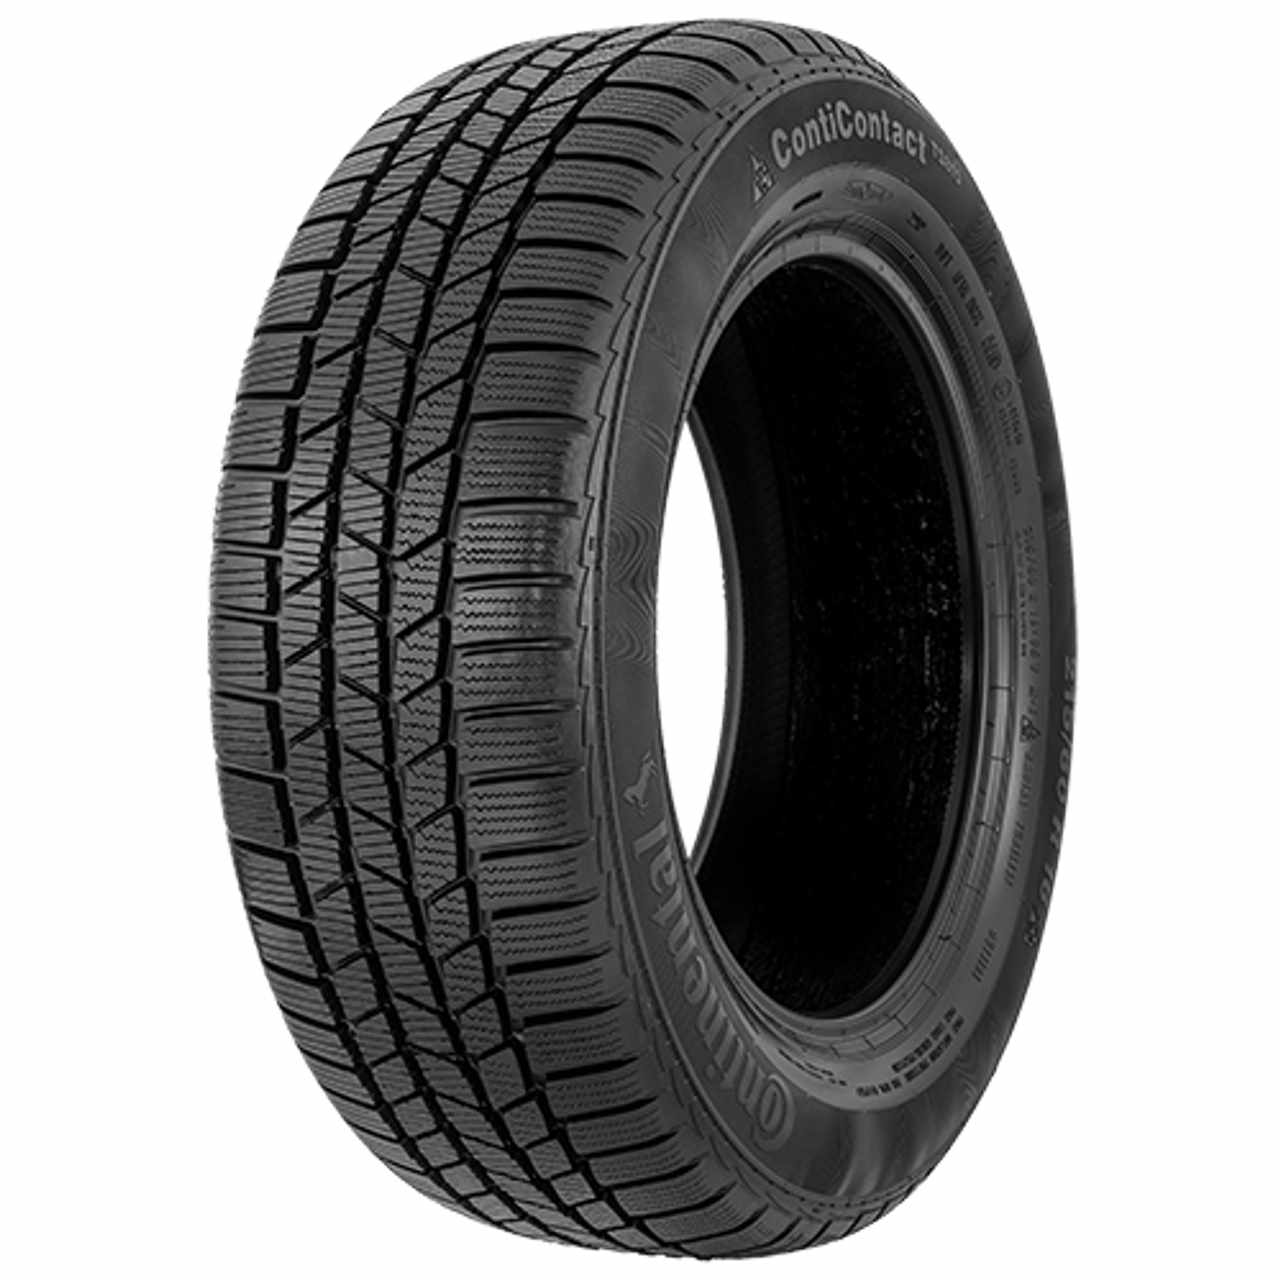 CONTINENTAL CONTICONTACT TS 815 (VW) 205/60R16 96V BSW XL